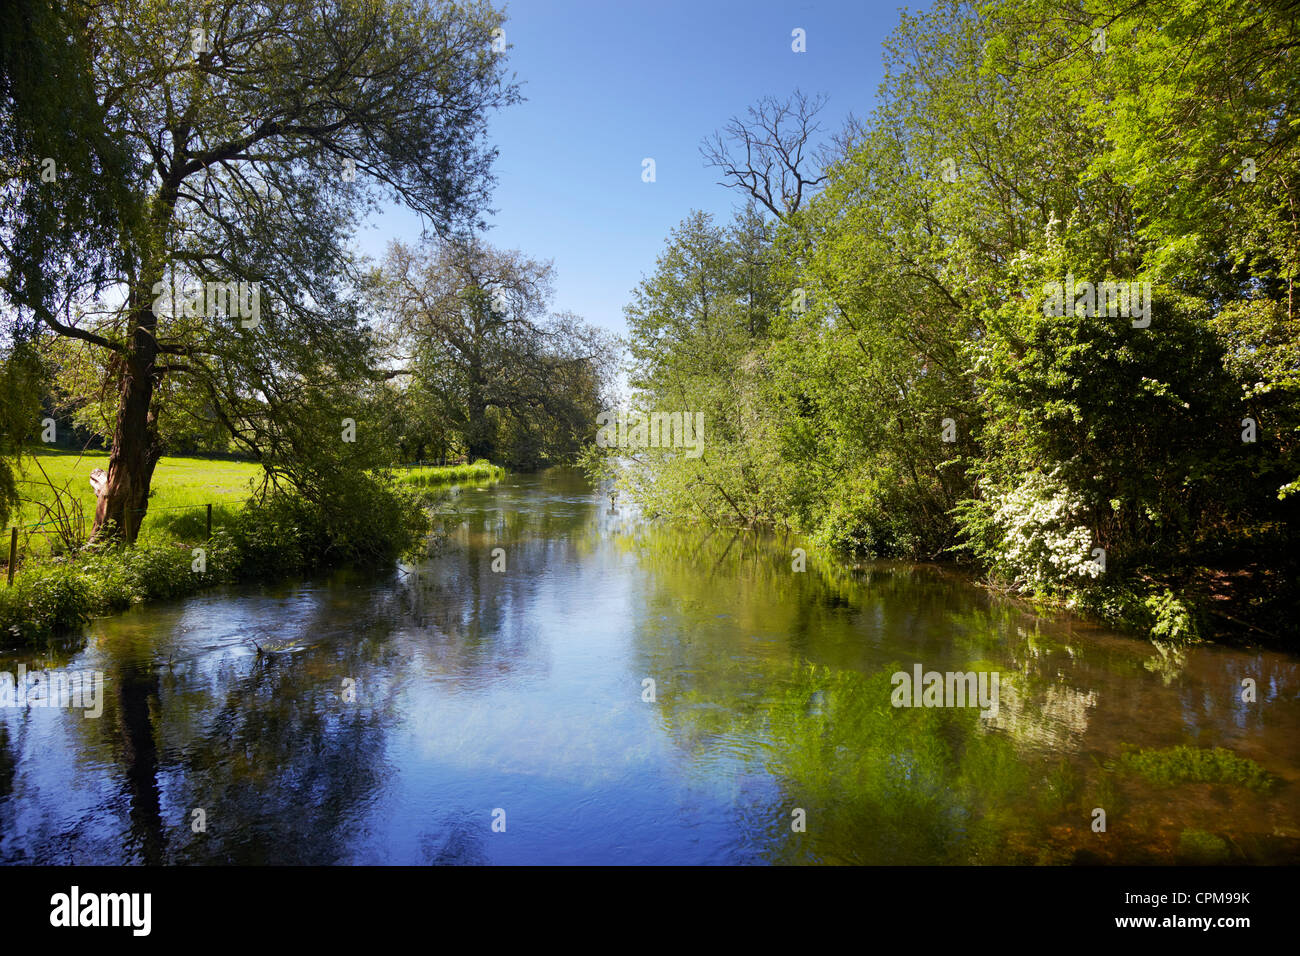 Fiume Itchen a Twyford, Hampshire, Inghilterra. Foto Stock